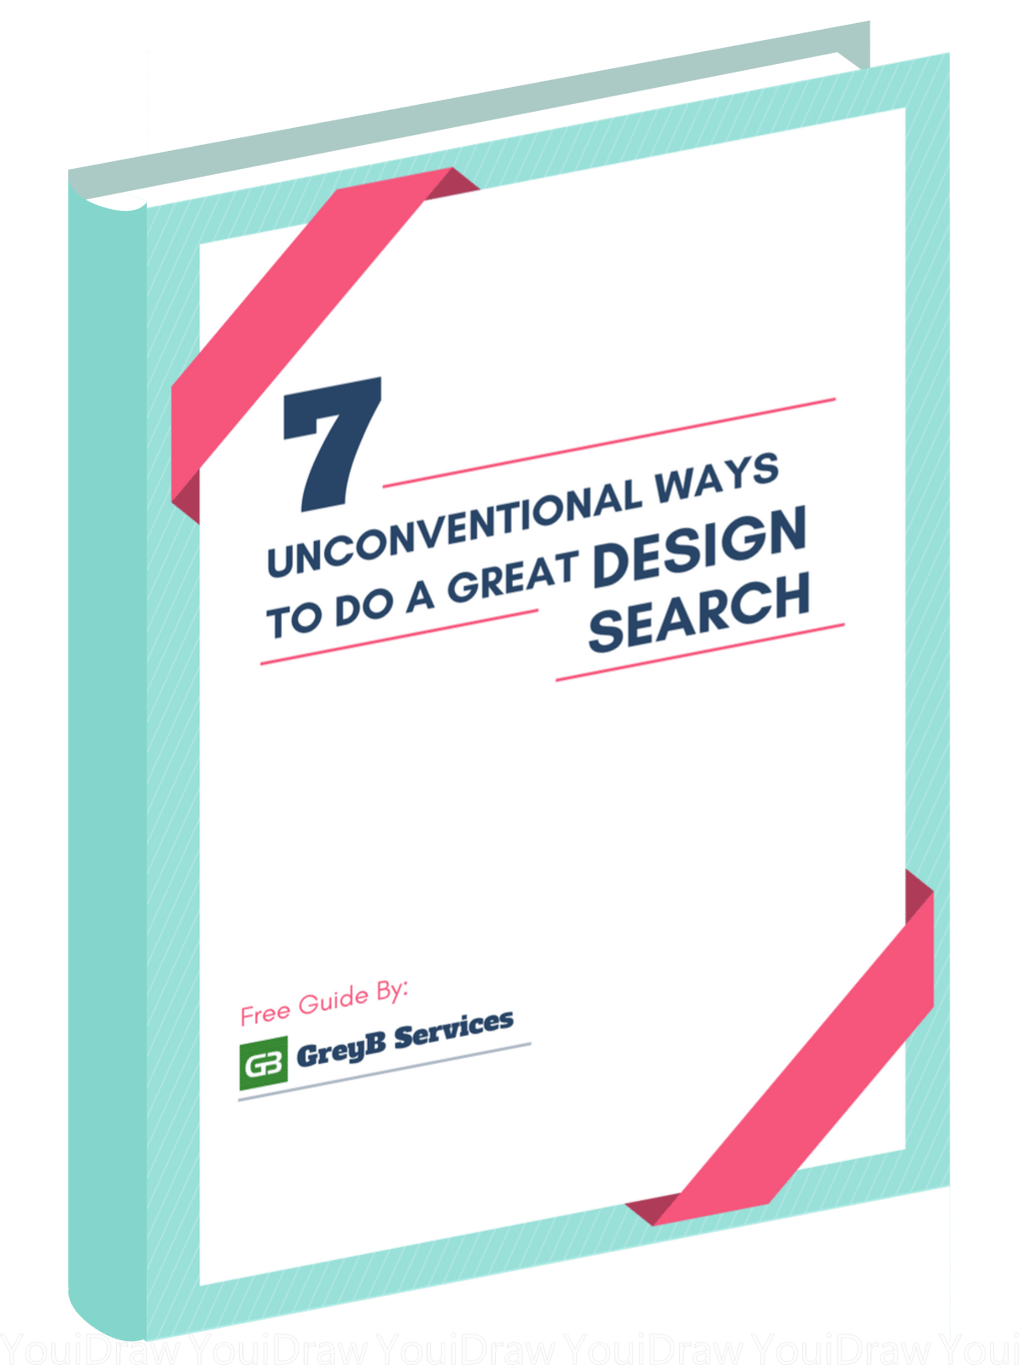 7_Unconventional_ways_to_perform_a_design_search_Book_Cover.png